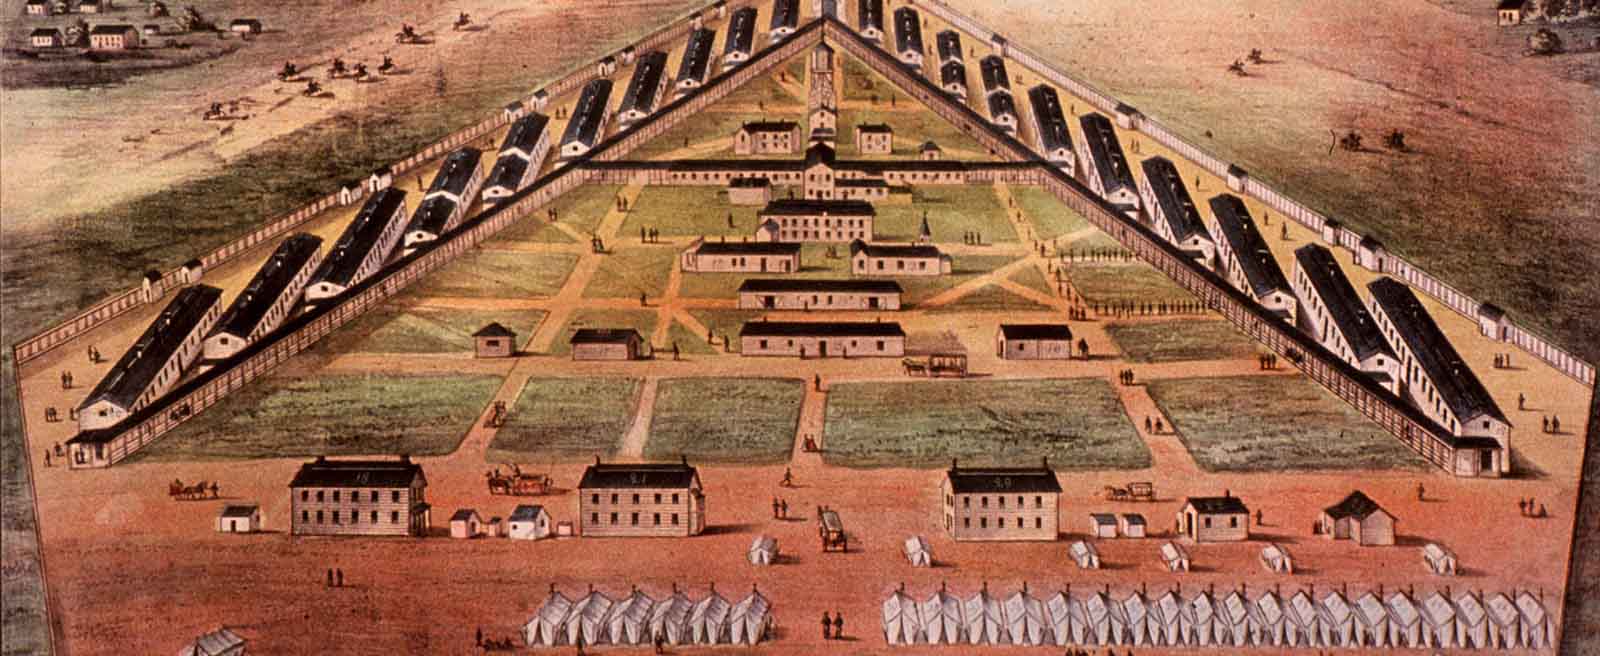 A color bird's eye view  of the Lincoln General Hospital complex including 20 pavilions, arranged in two lines forming a V shape, and 25 tent wards.